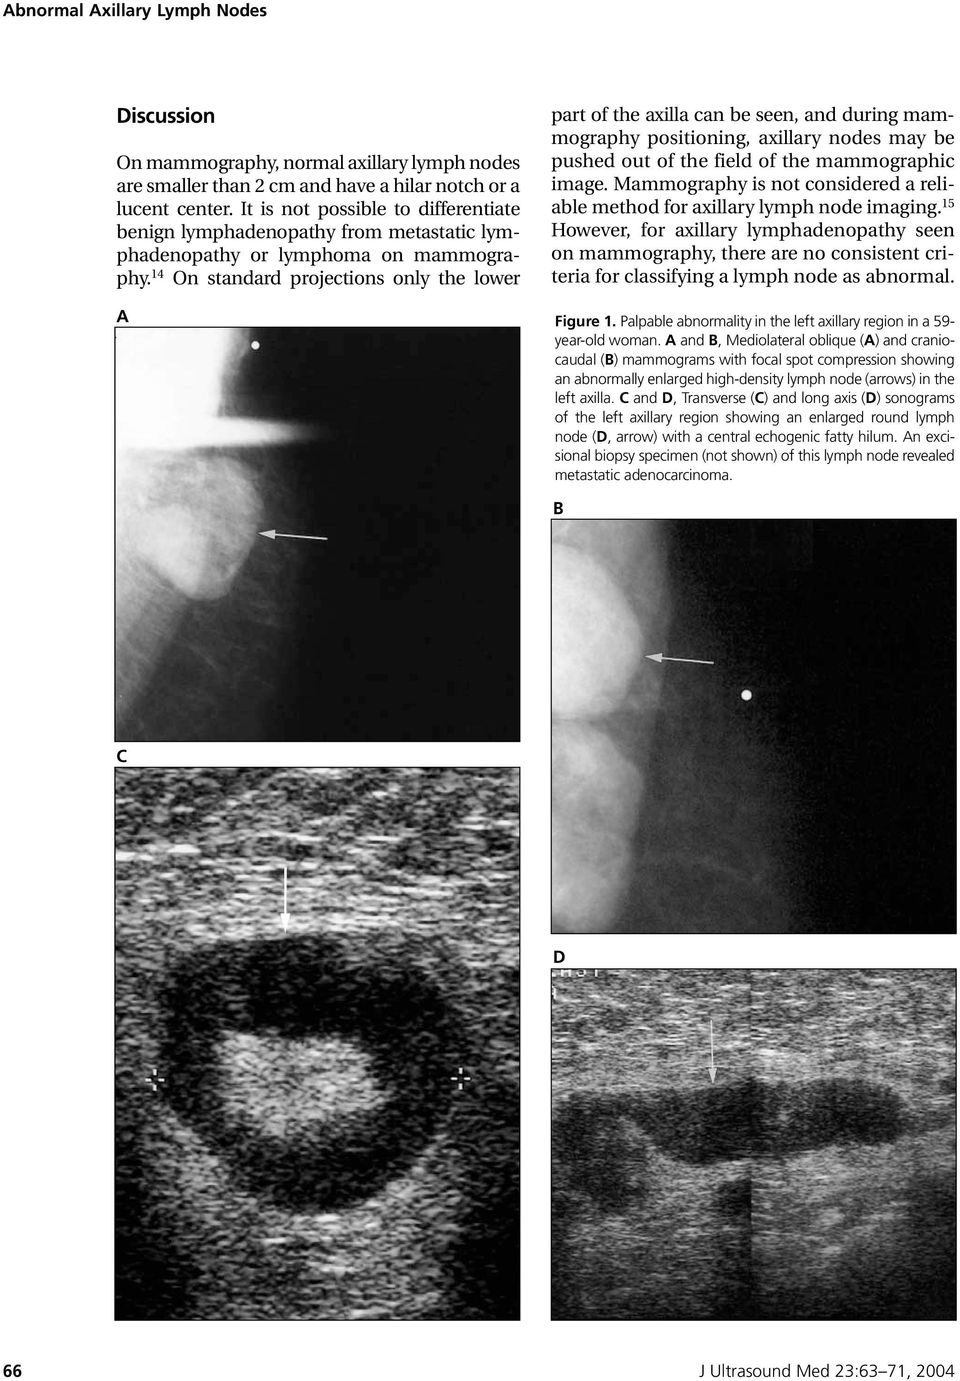 14 On standard projections only the lower A part of the axilla can be seen, and during mammography positioning, axillary nodes may be pushed out of the field of the mammographic image.